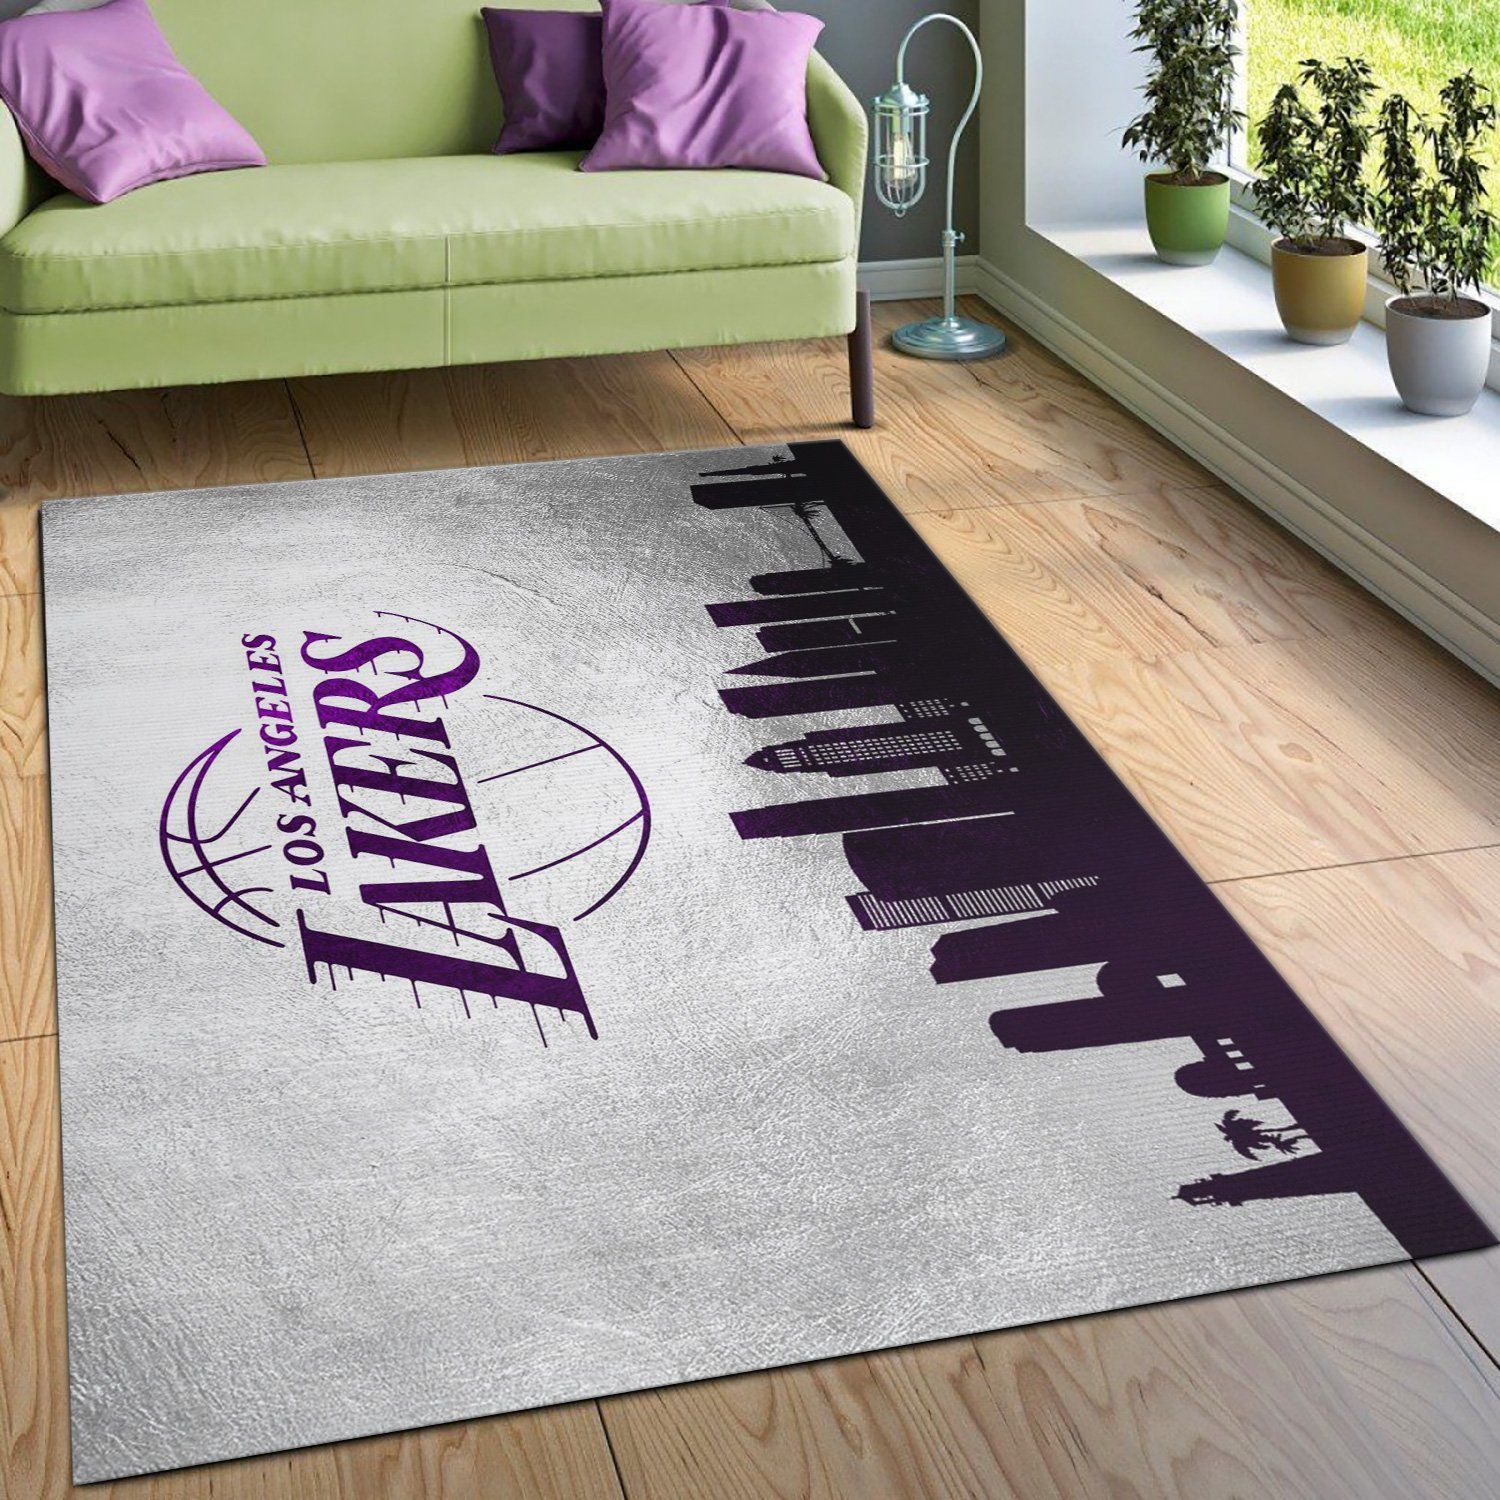 Los Angeles Lakers Skyline Area Rug Carpet, Living Room Rug, Home US Decor - Indoor Outdoor Rugs 3